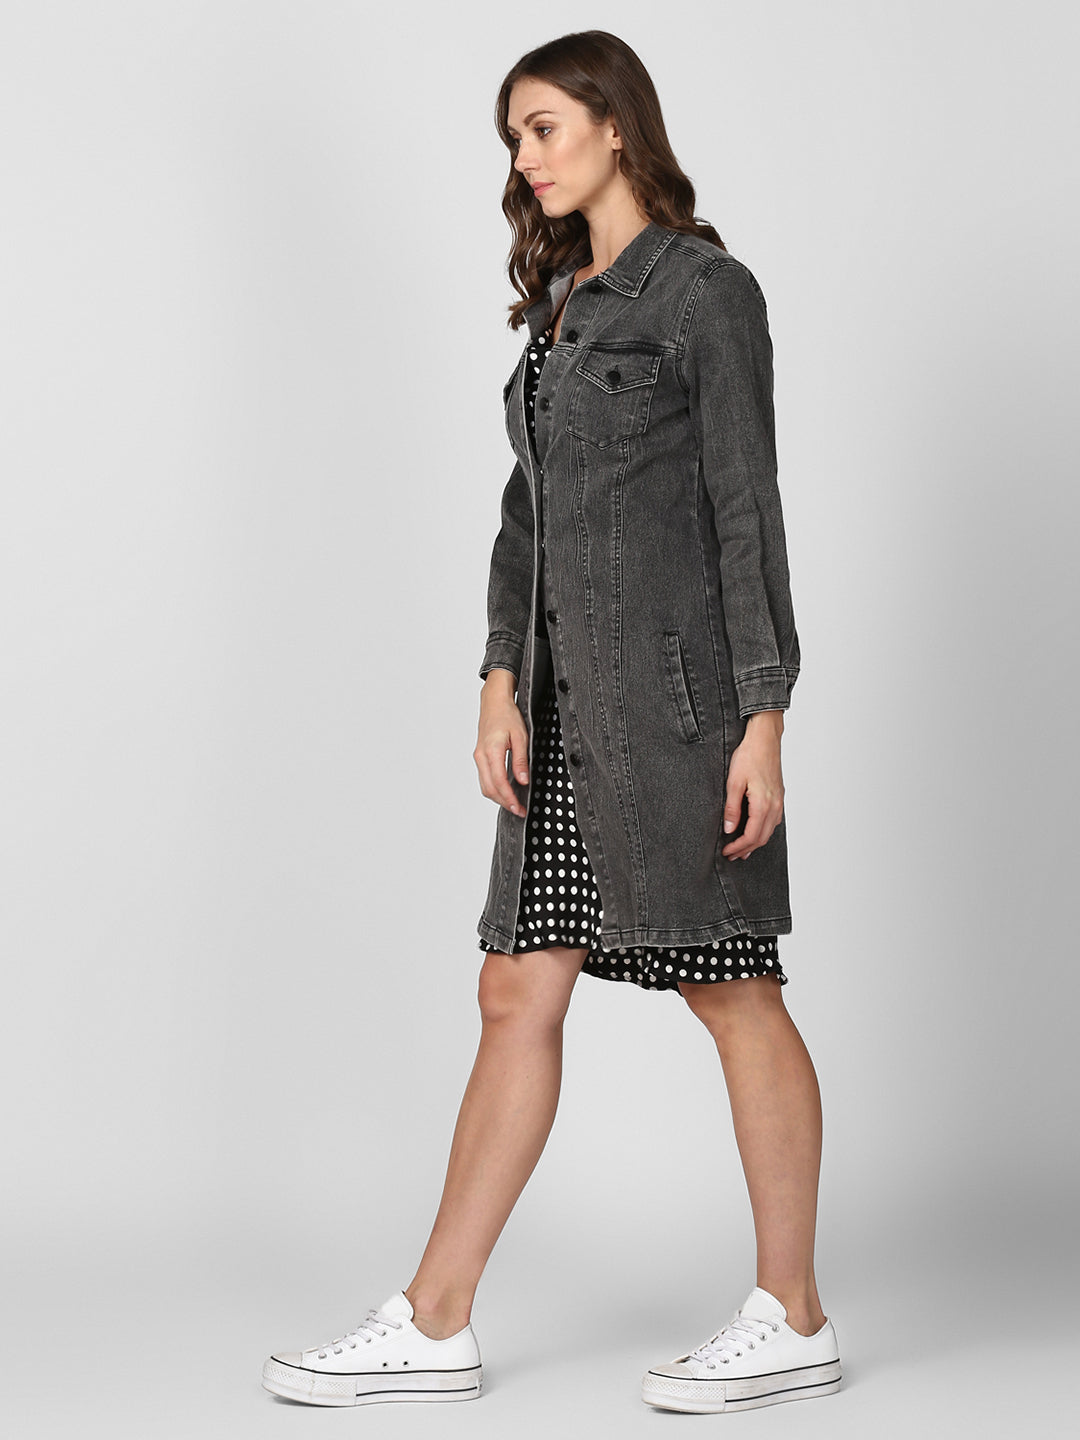 Women's Grey Long Overcoat Style Denim Jacket with Washed effect